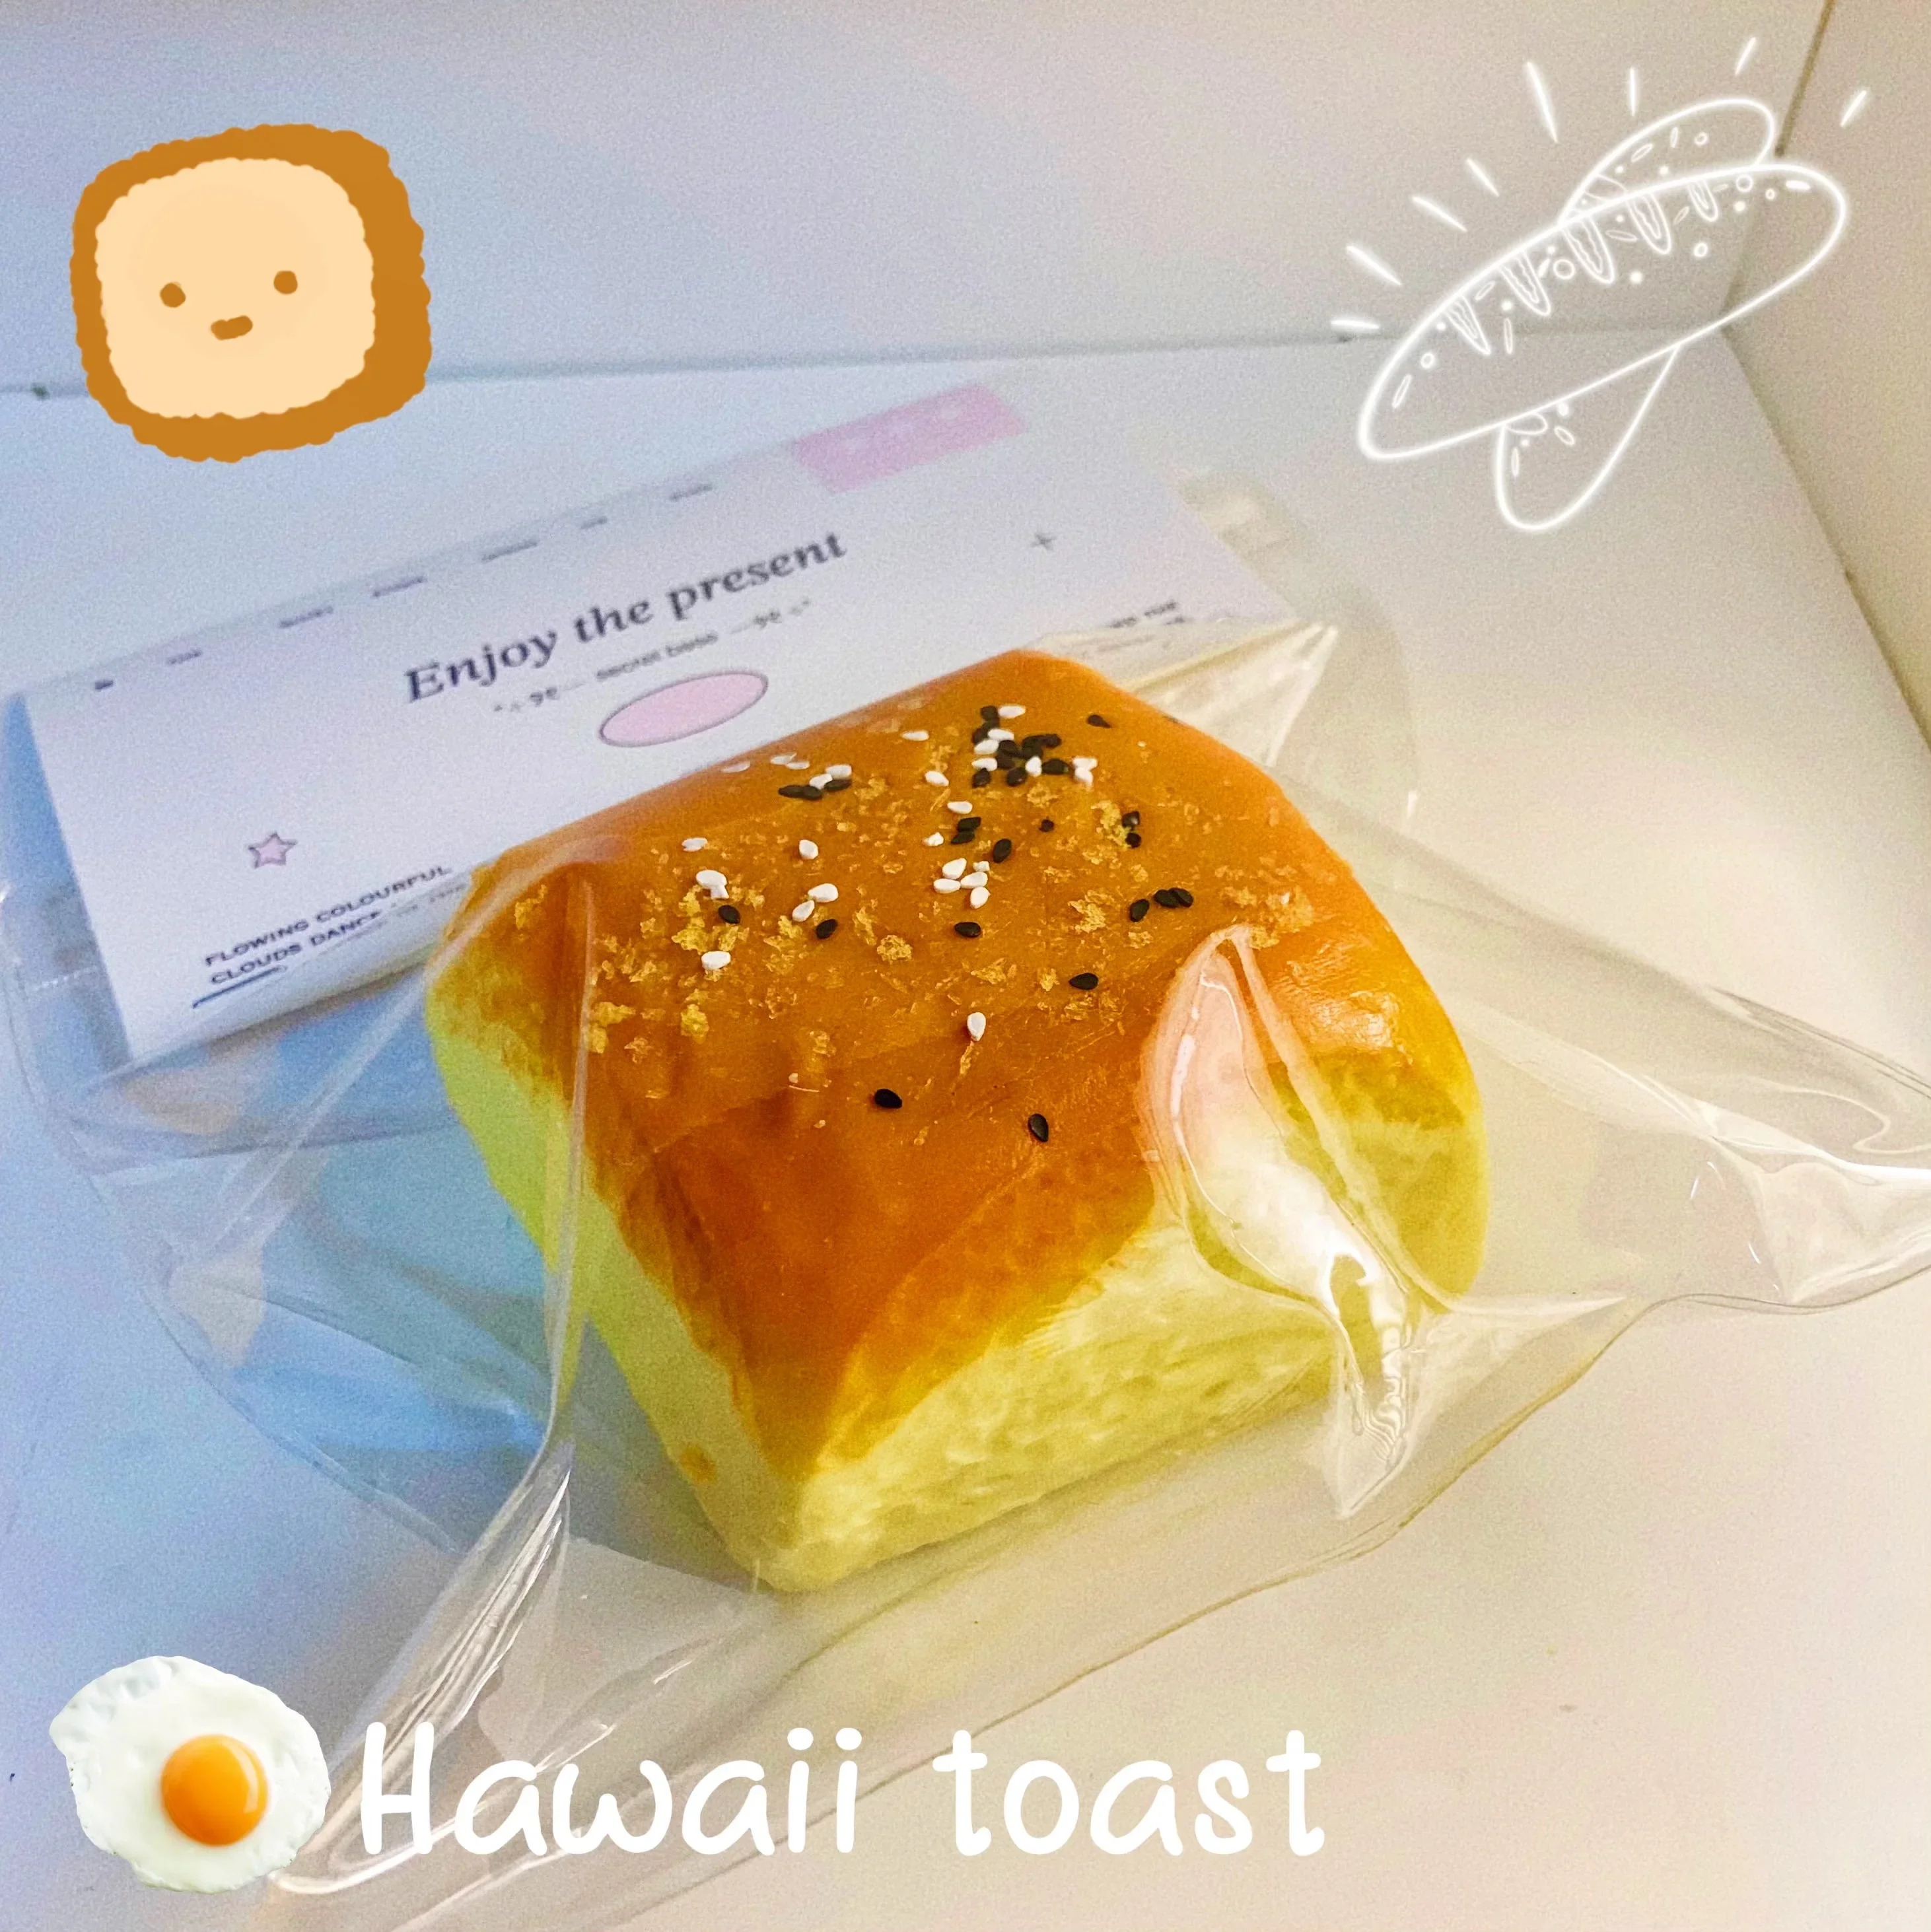 

Taba Squishy Silicone Toy Big Dried Meat Floss Sesame Roasted Hawaii Bread Toast Tabby Squishy Stress Release Hand Relax Gift